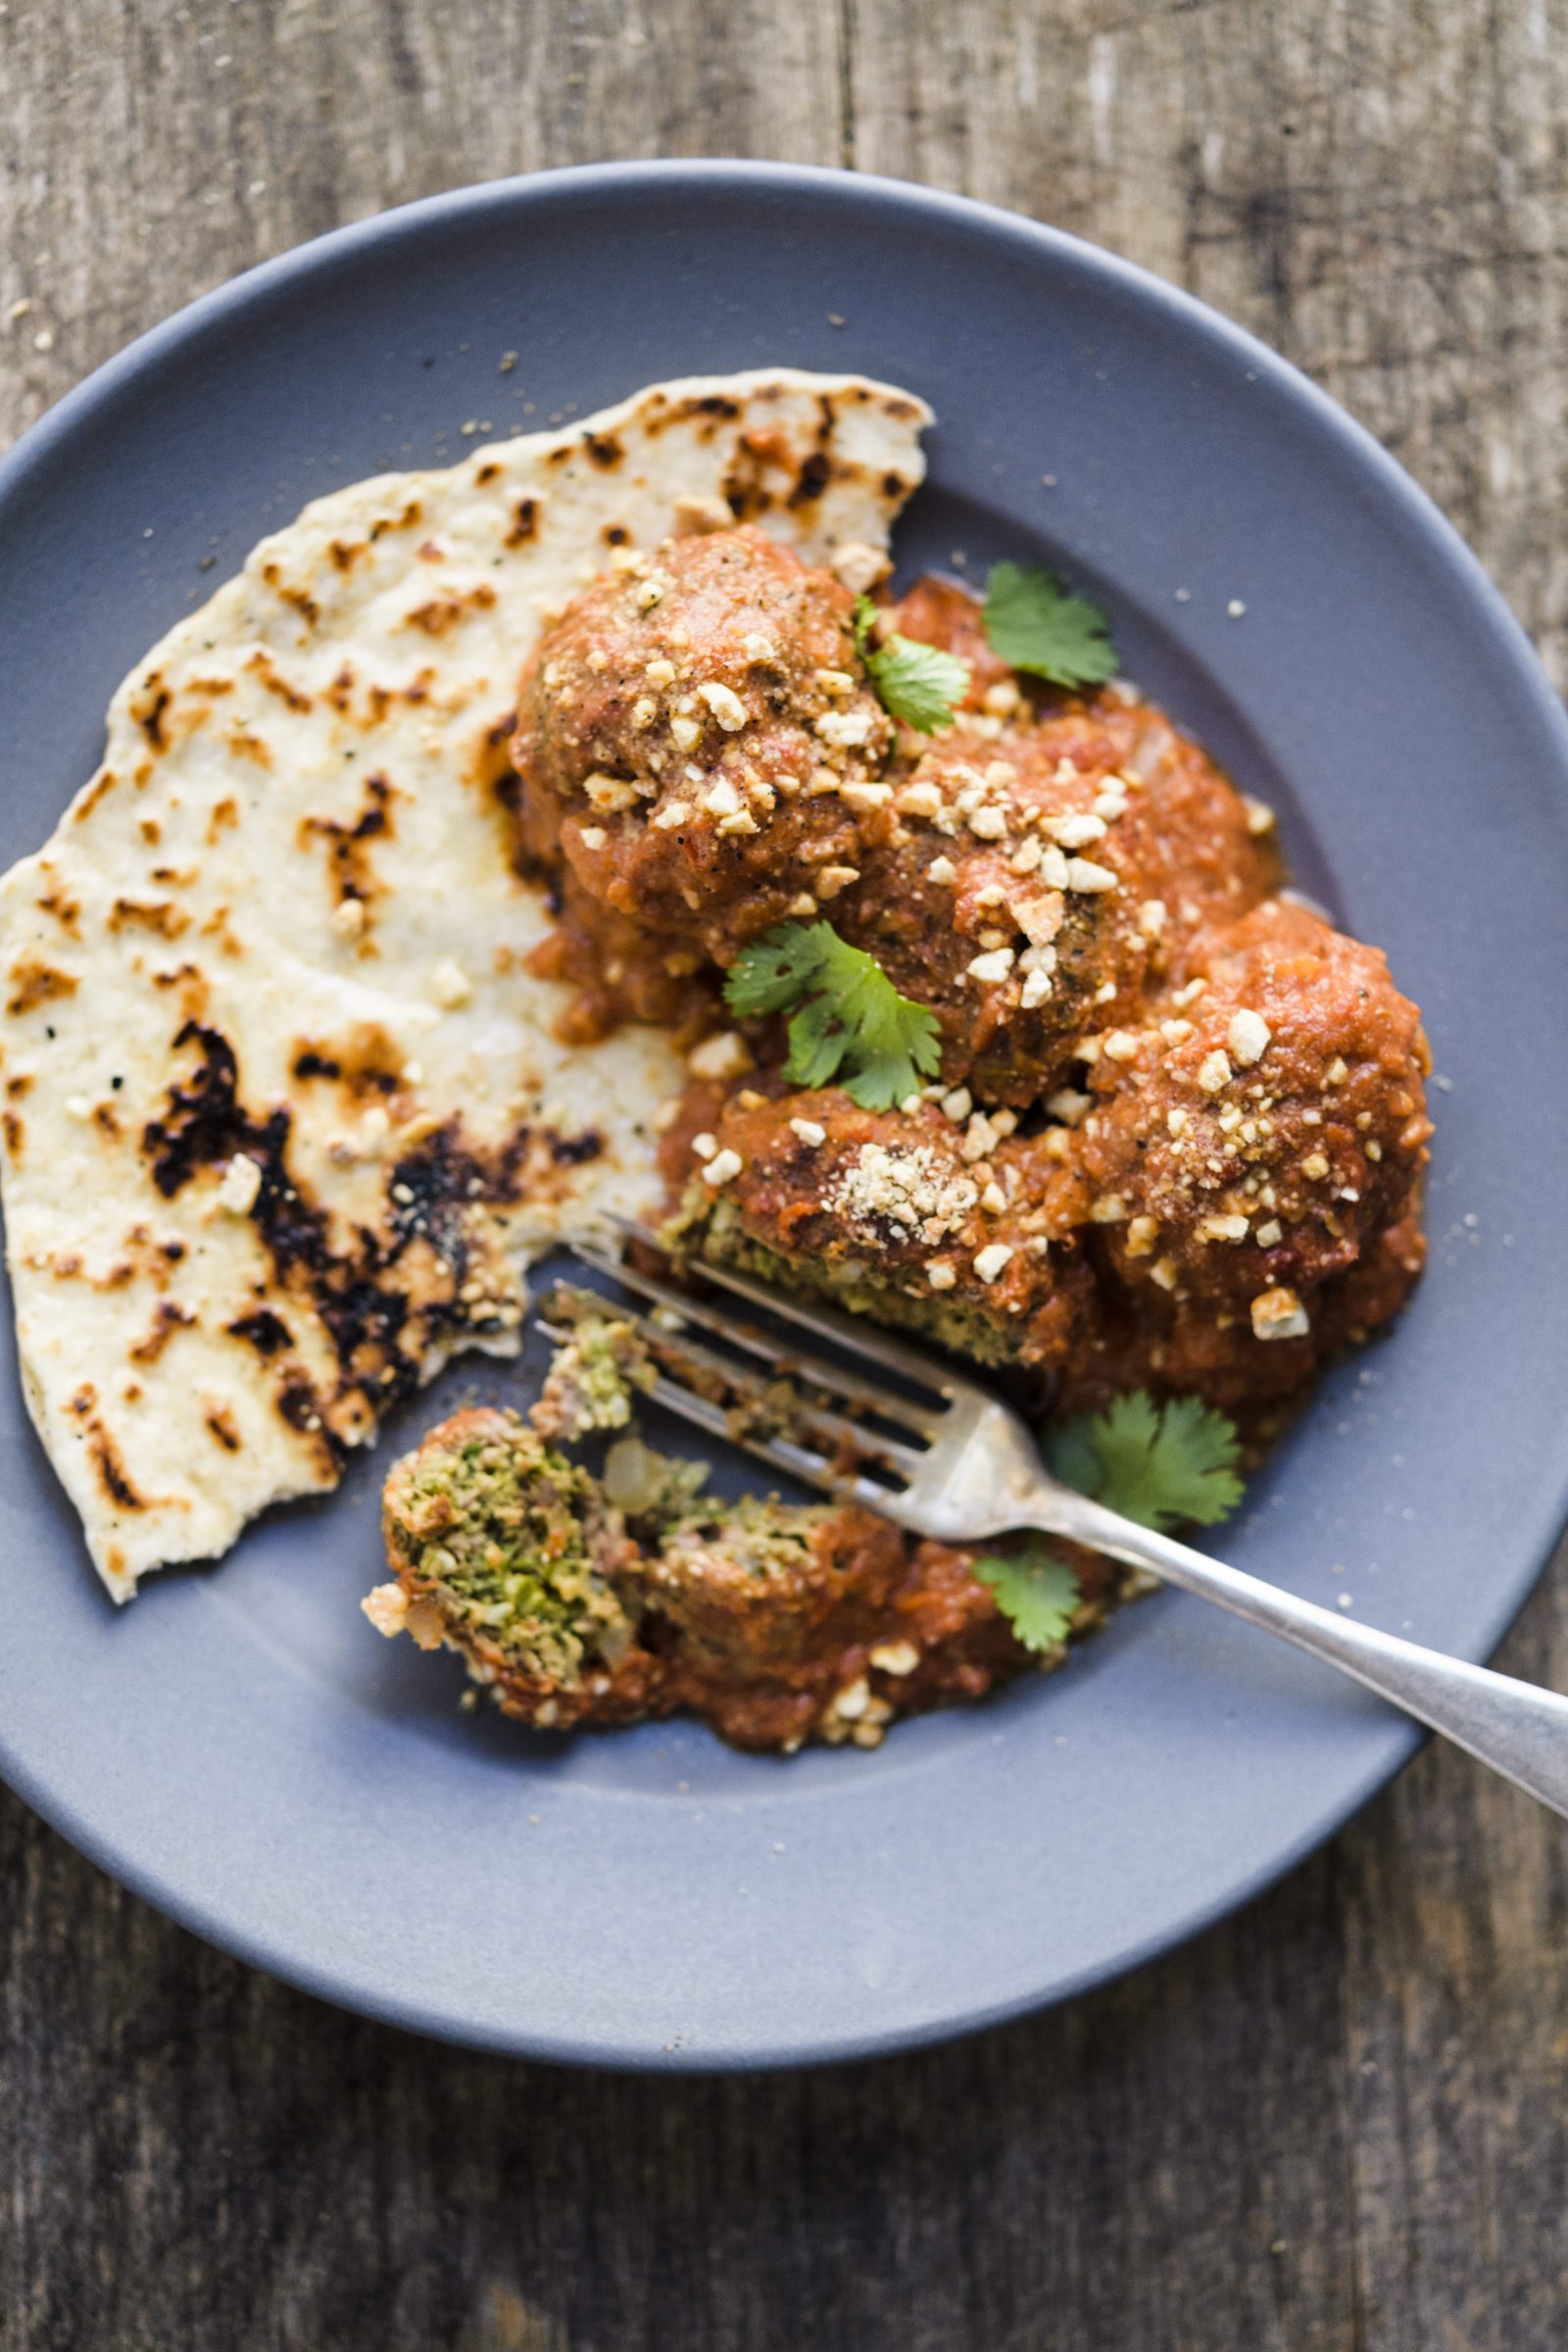 Cashew-Coconut Meatballs with Creamy Spiced Tomato Sauce (Tuesday Nights)